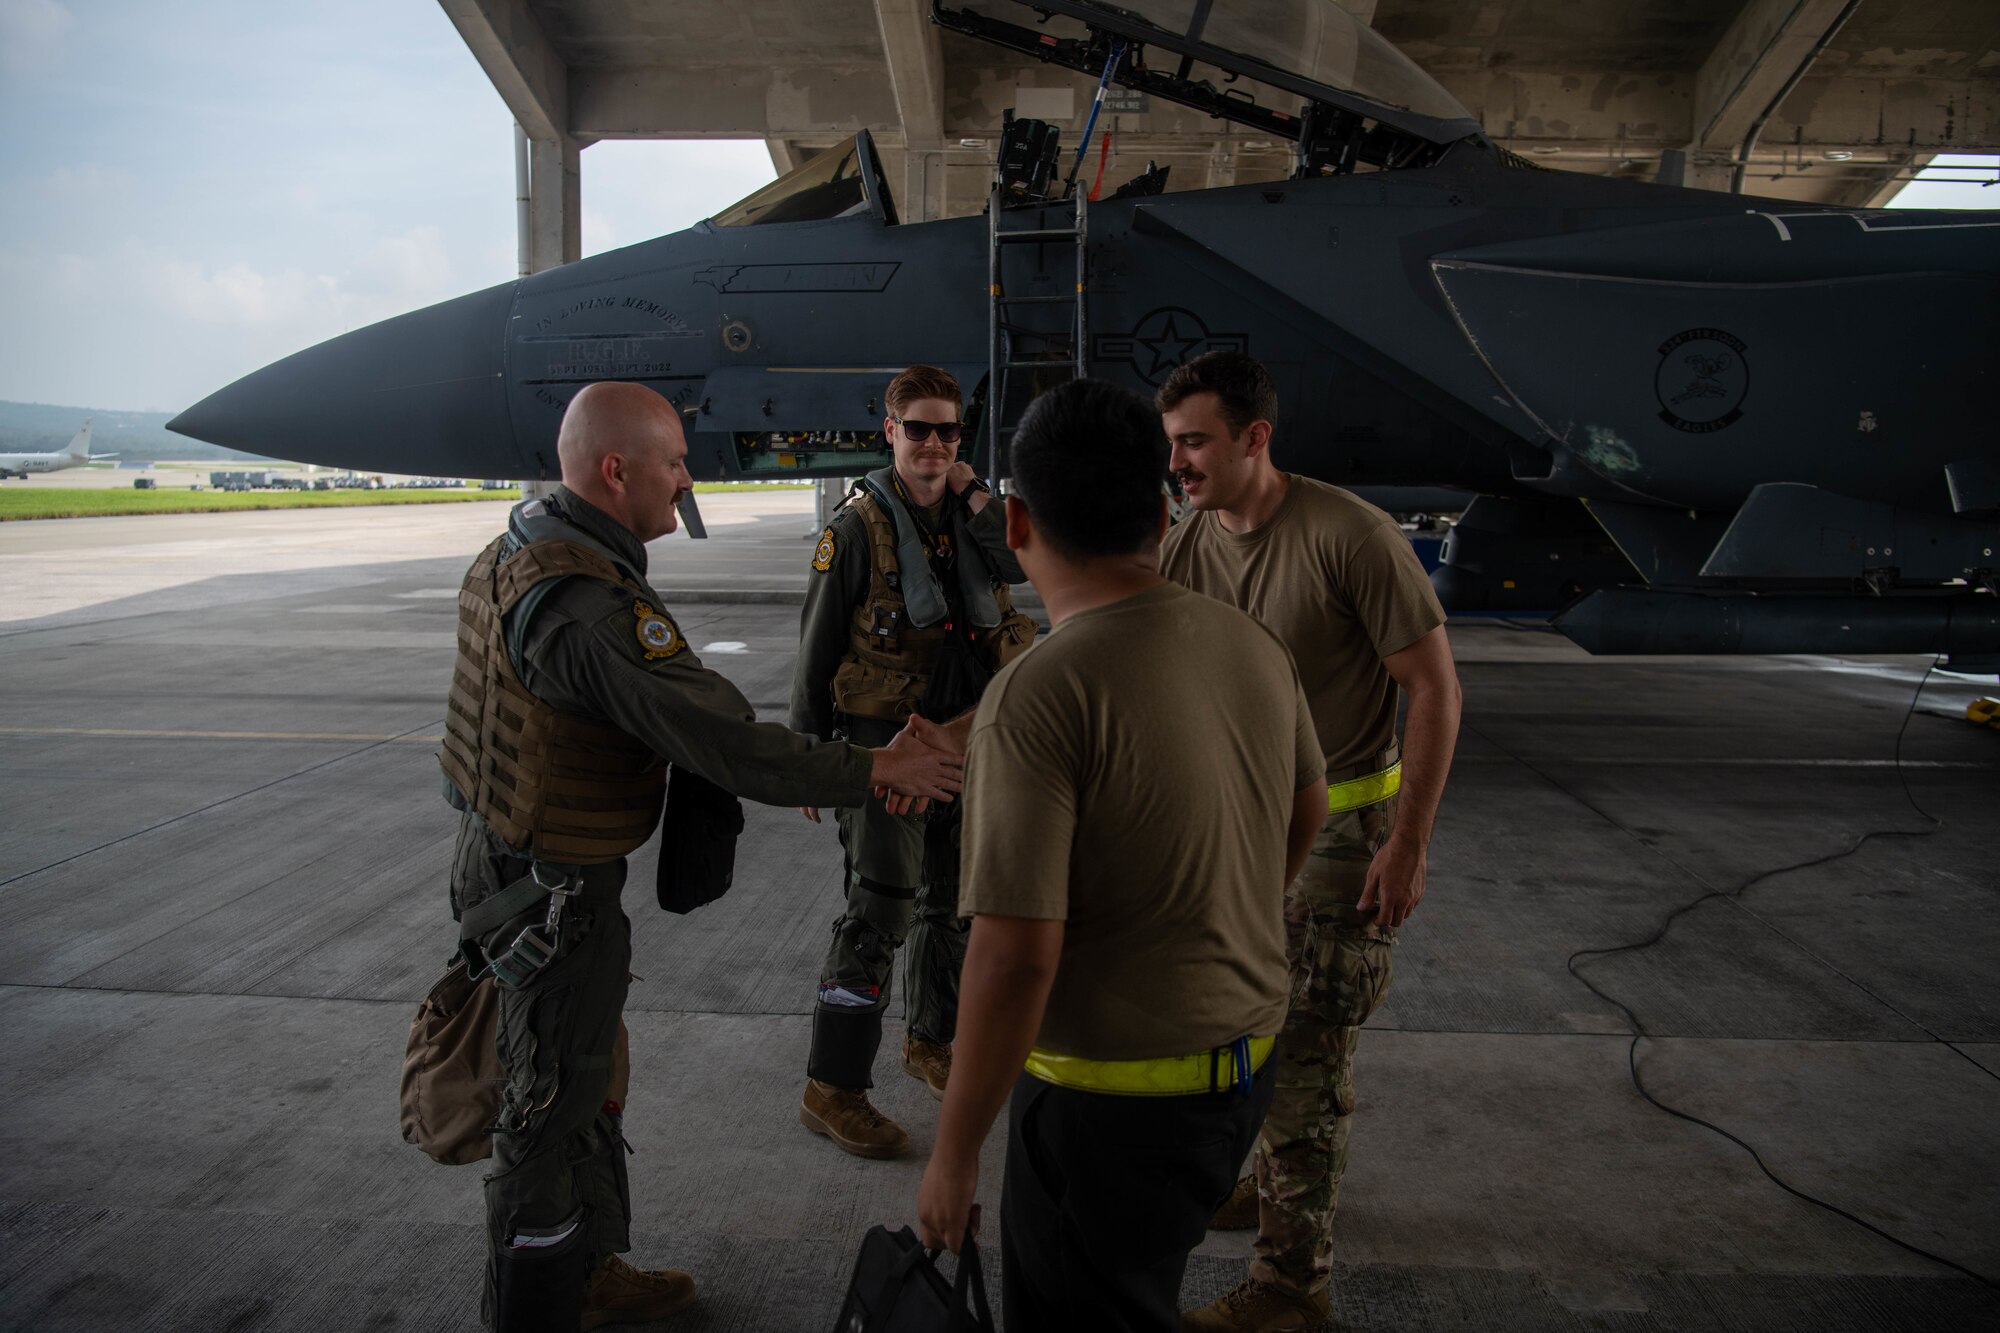 Two pilots and two maintenance workers greet each other in front of an F-15E Strike Eagle.